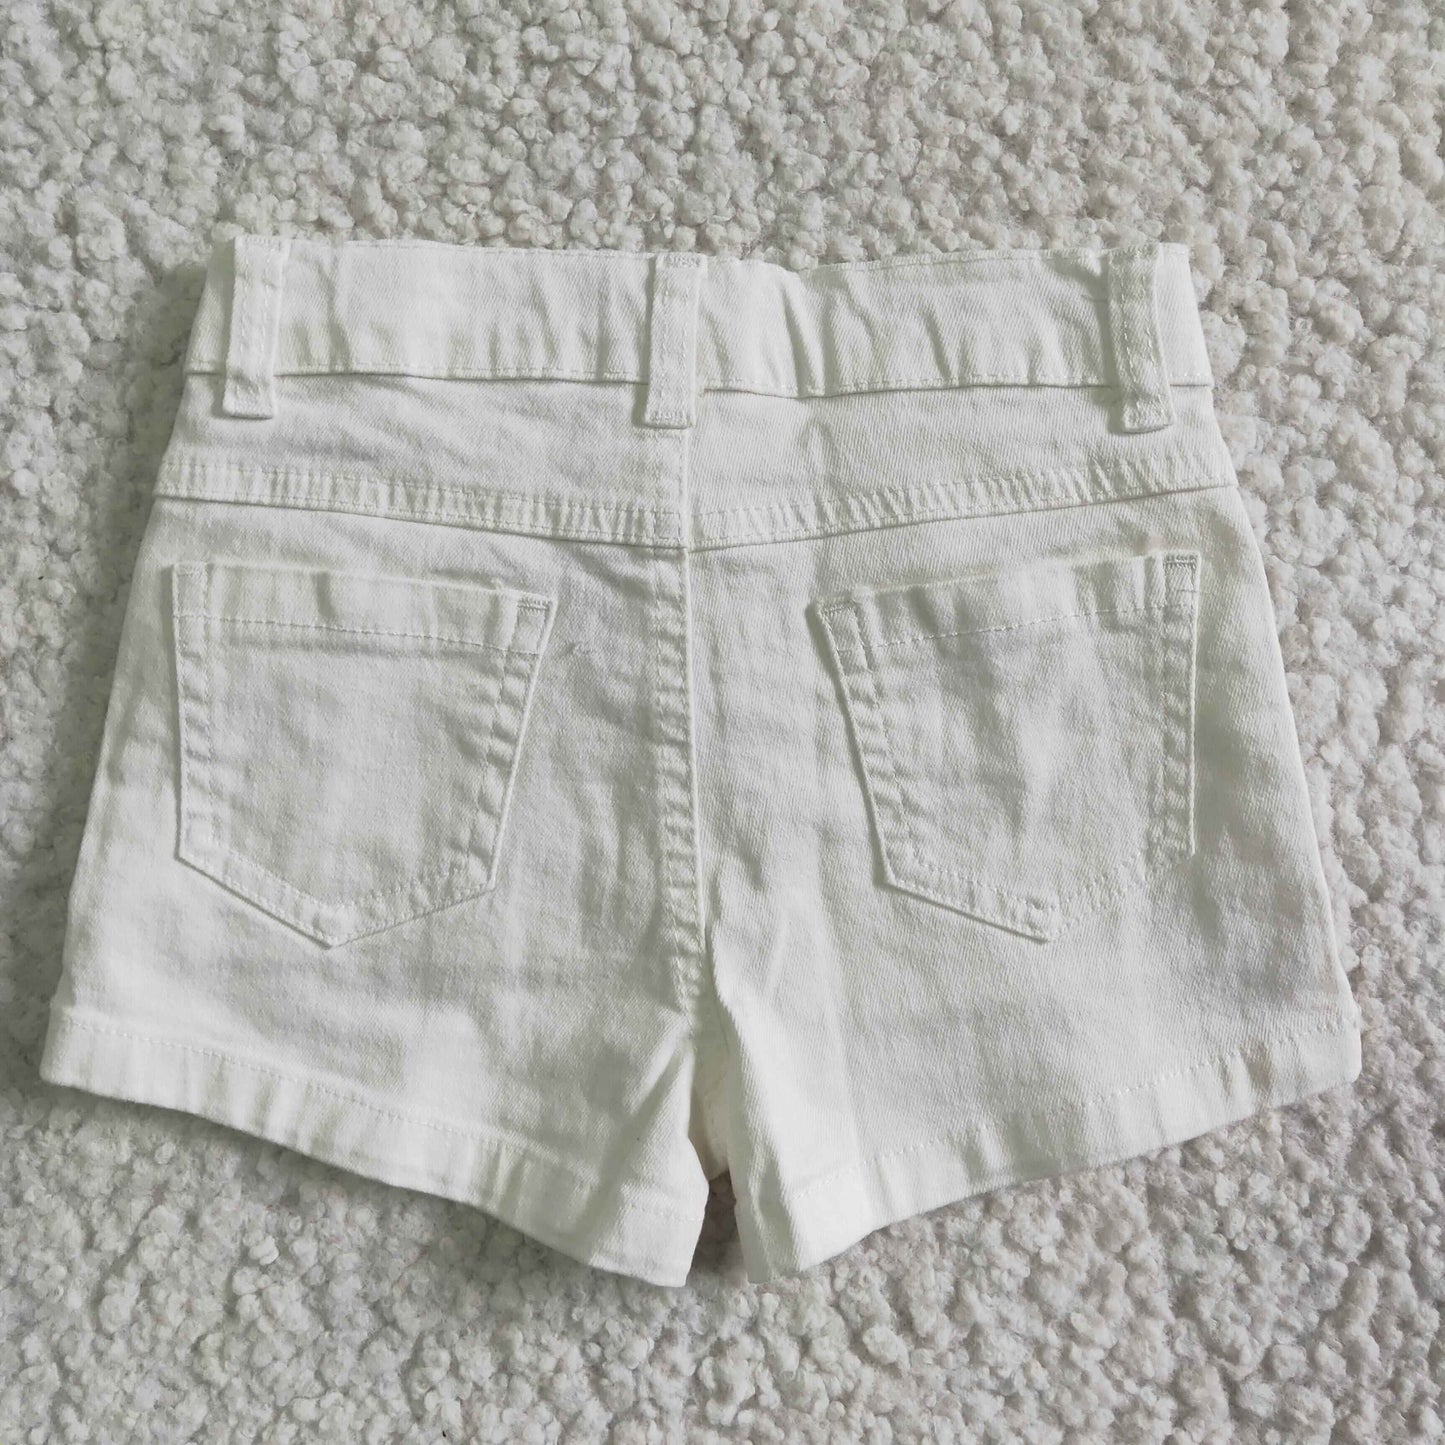 SS0012 White Girls' Ripped Shorts Jeans